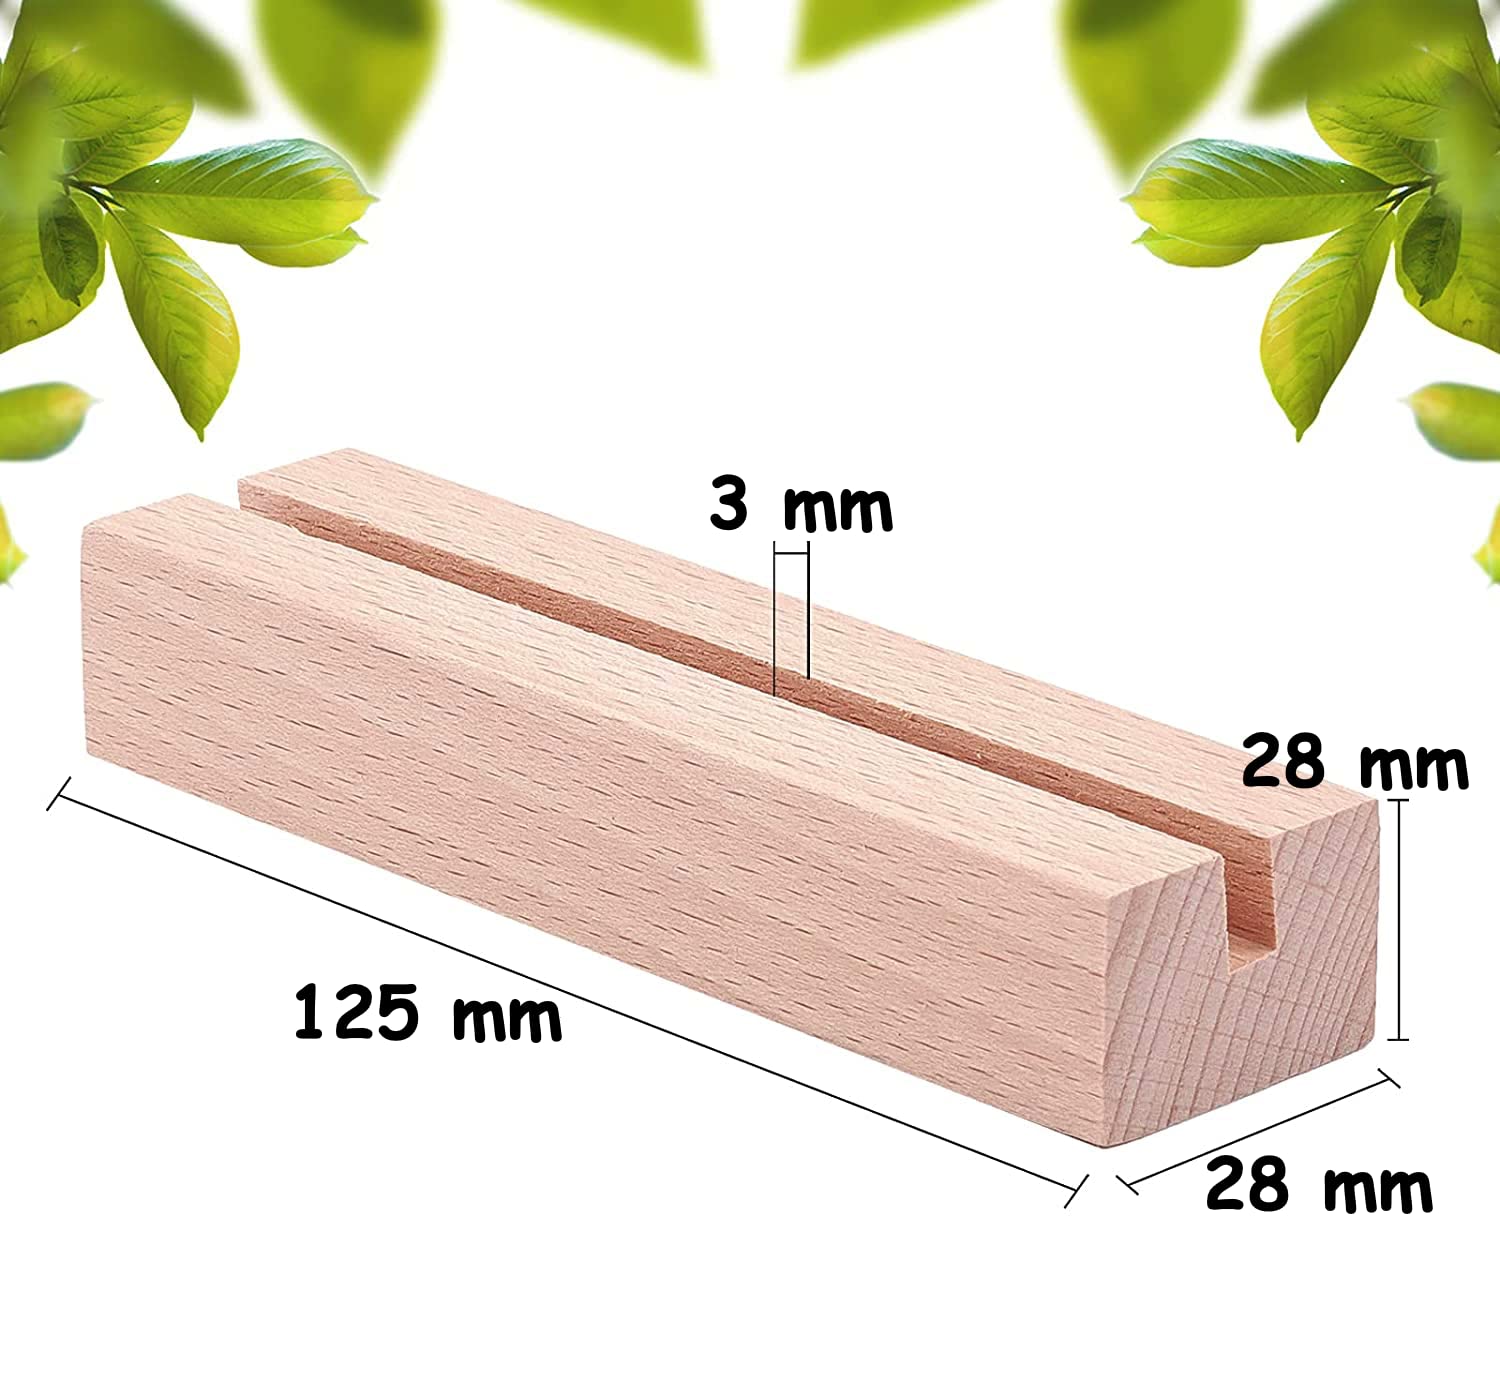 NJ Wood Card Holder Natural Beech Wood Table Number Holders, Wood Photo/Picture Holders, Conference Name Card Stand, Buffet menu Card Holder, Perfect for Hotel/Home Parties and conferences: 6 Pcs Set